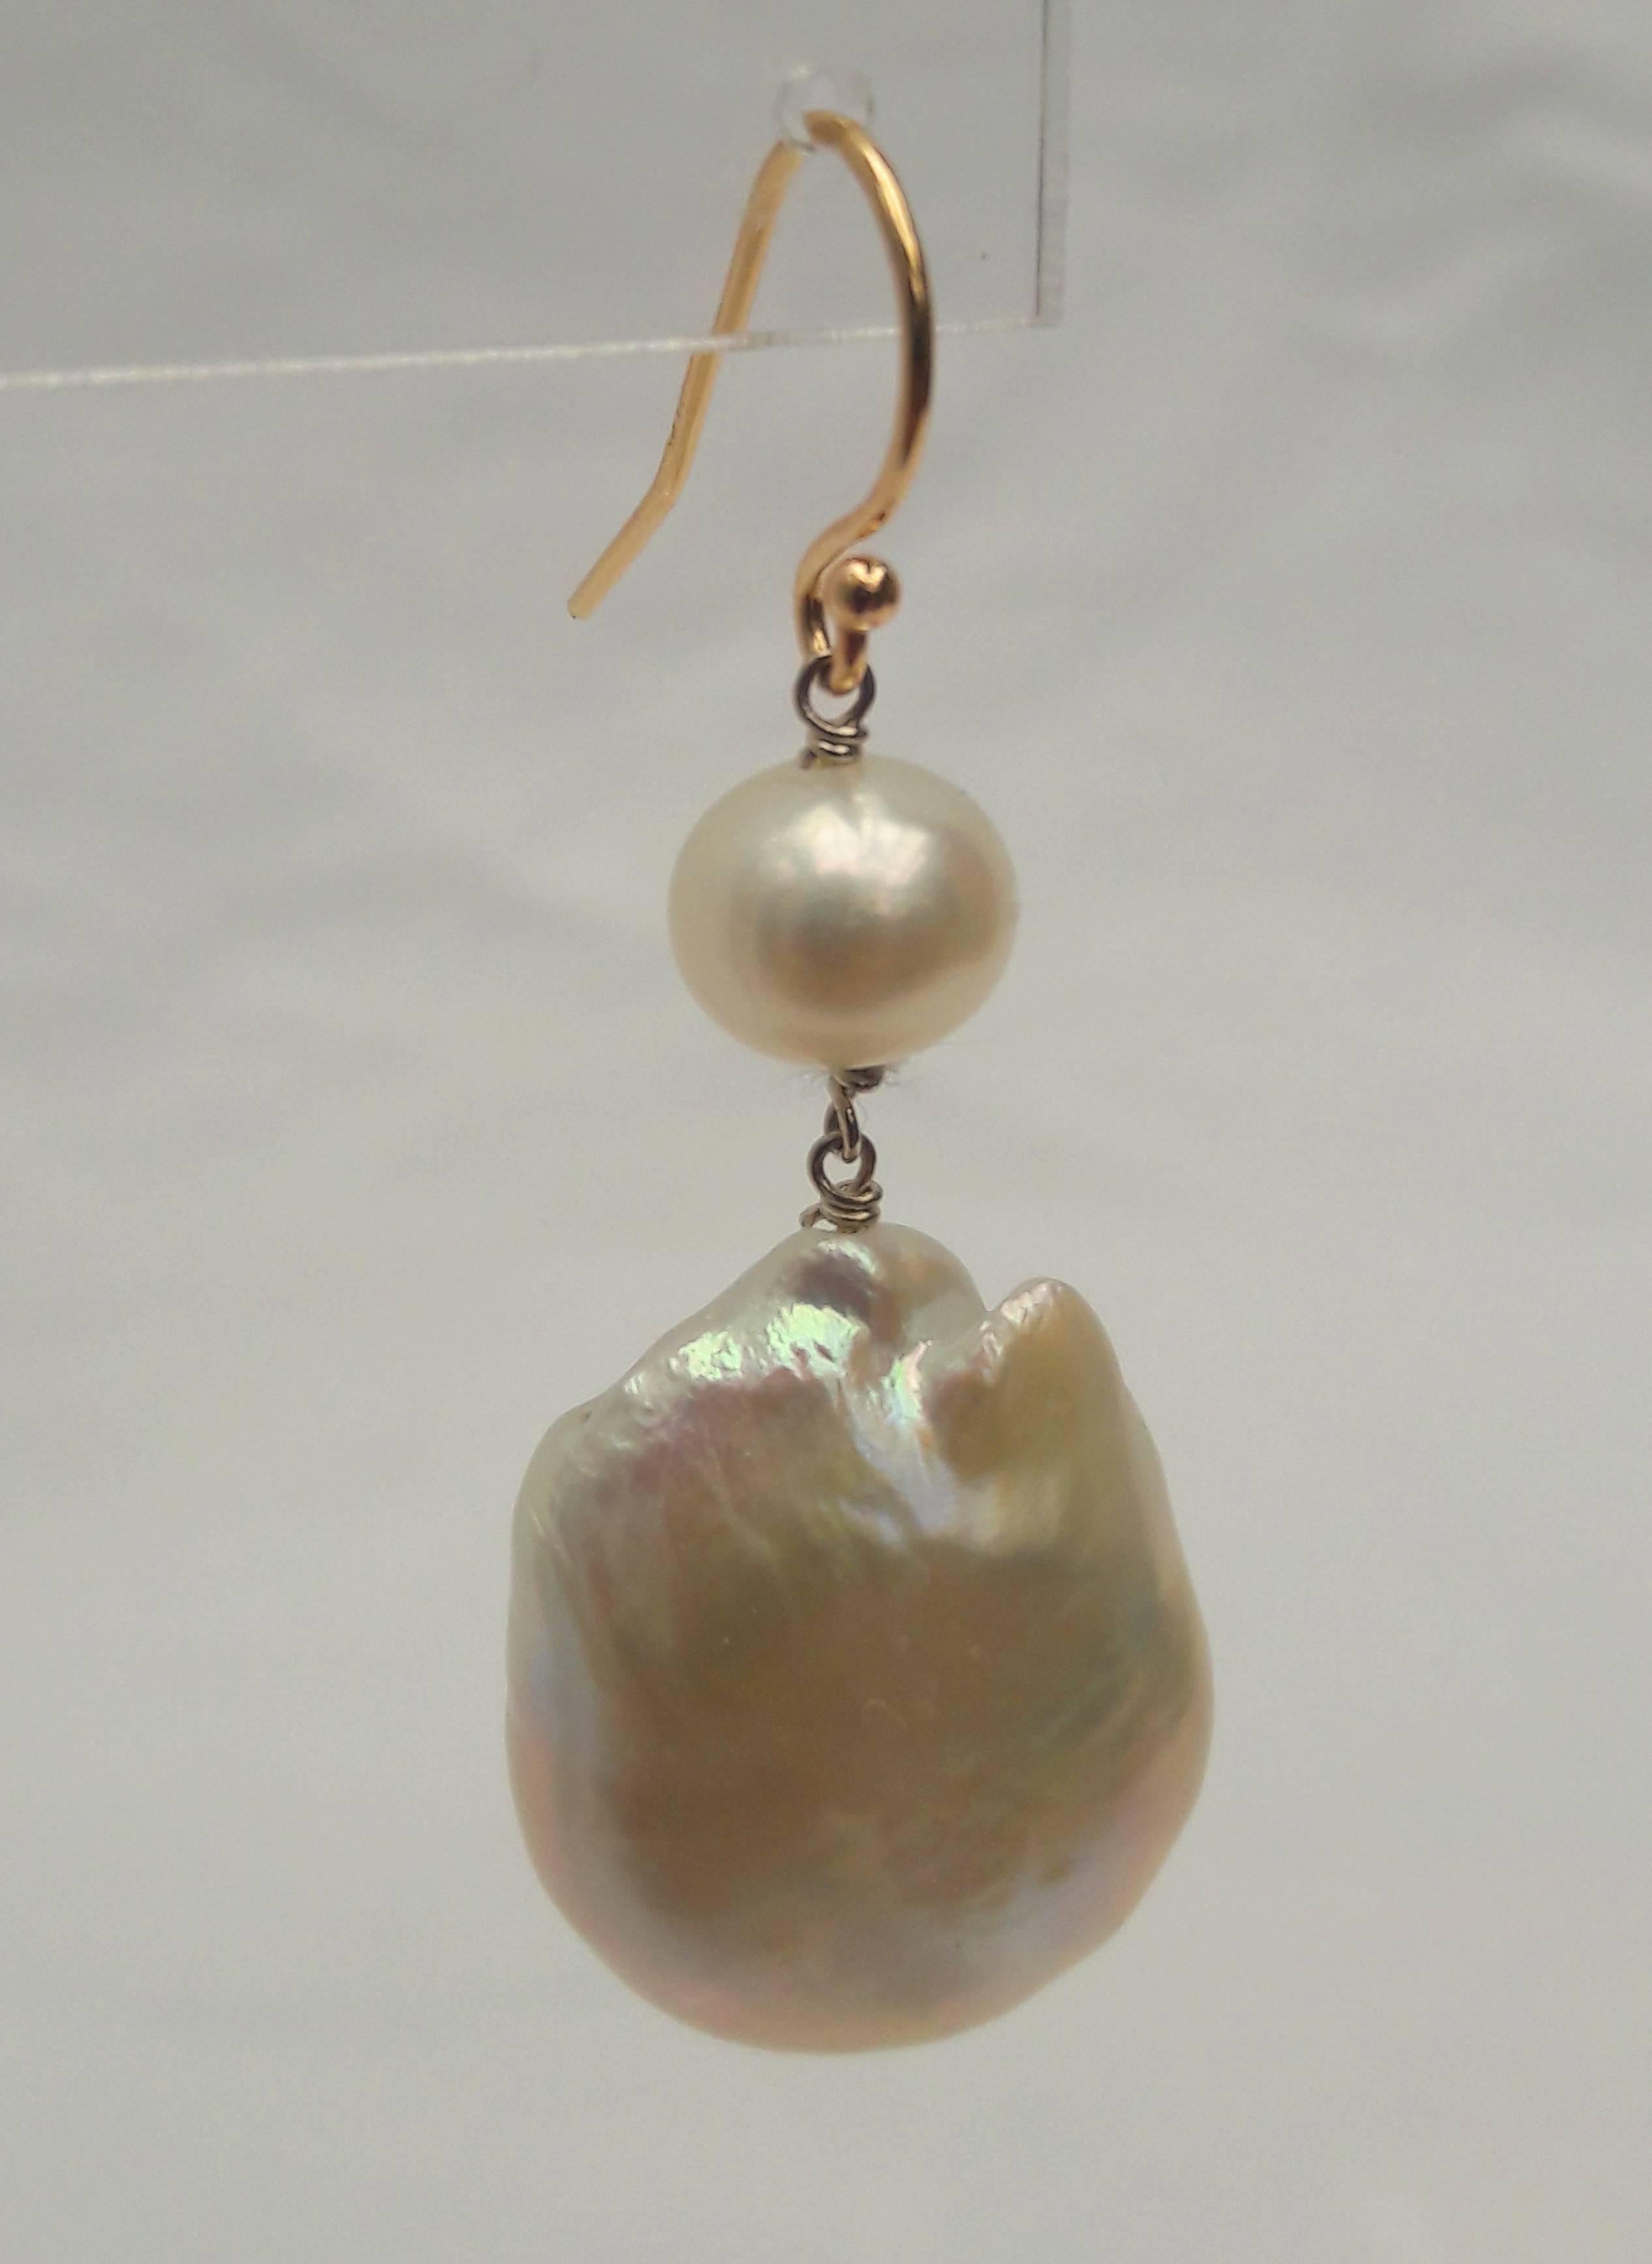 The round and lovely 6 mm round pearl on top, and a large, raw baroque bottom pearl on bottom. Each of these earrings make for a unique and elegant set of earrings. Secured with 14 K yellow gold hooks, these earrings pair well with anything.

top to